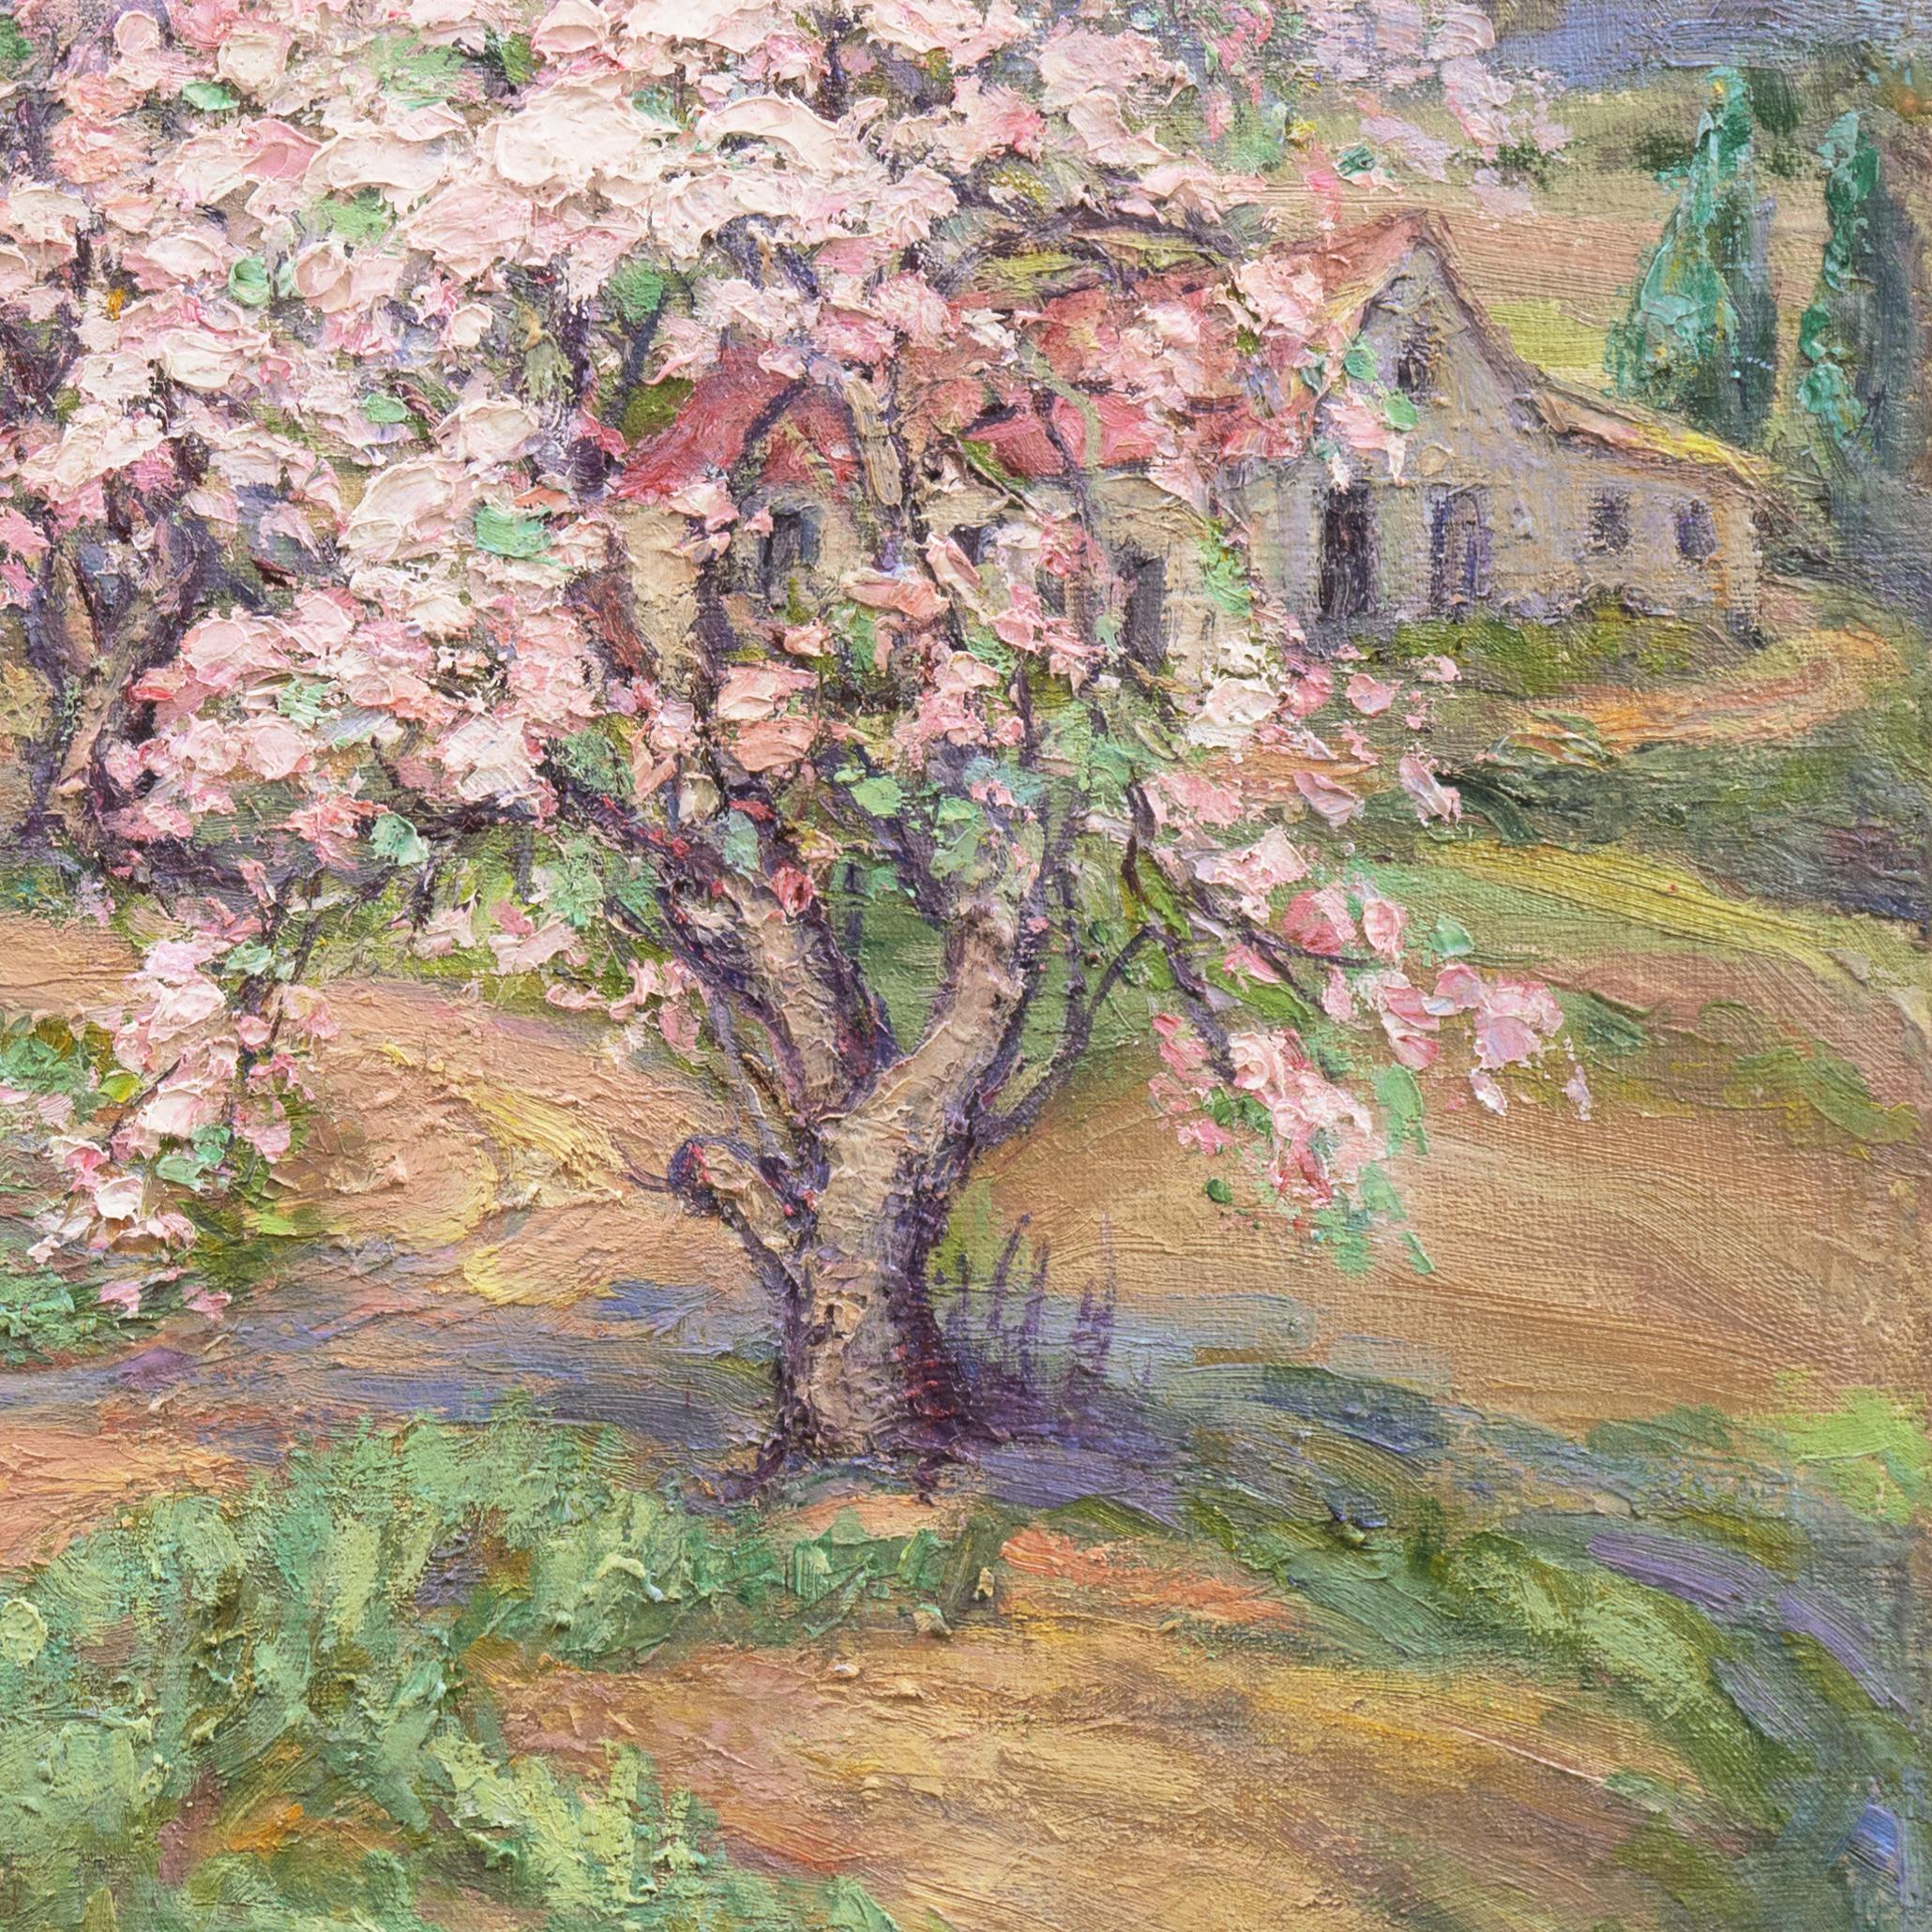 An intimate spring landscape showing a fertile valley with blossom-laden apple trees in the foreground  framing a red-tiled, stucco farmhouse and a view beyond towards distant hills.

Signed lower right, 'N.J. Martin' (American, 20th century) and